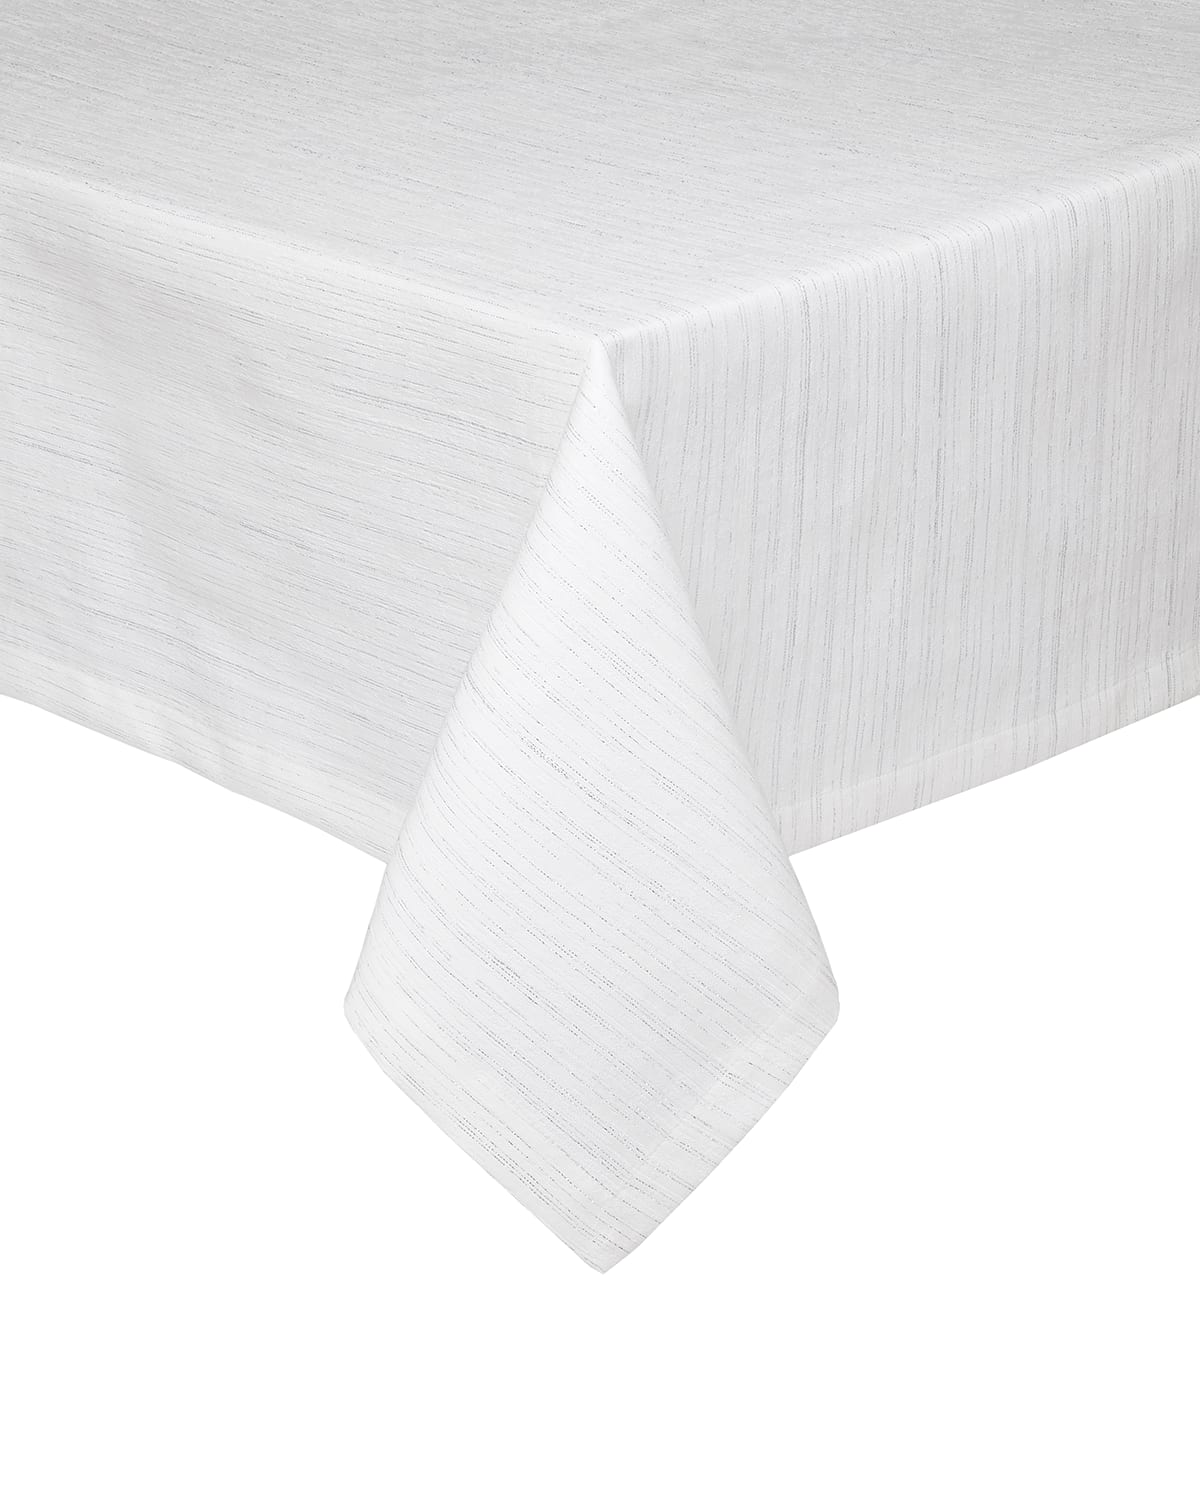 Shop Mode Living Vail Tablecloth, 70"dia. In White Pattern